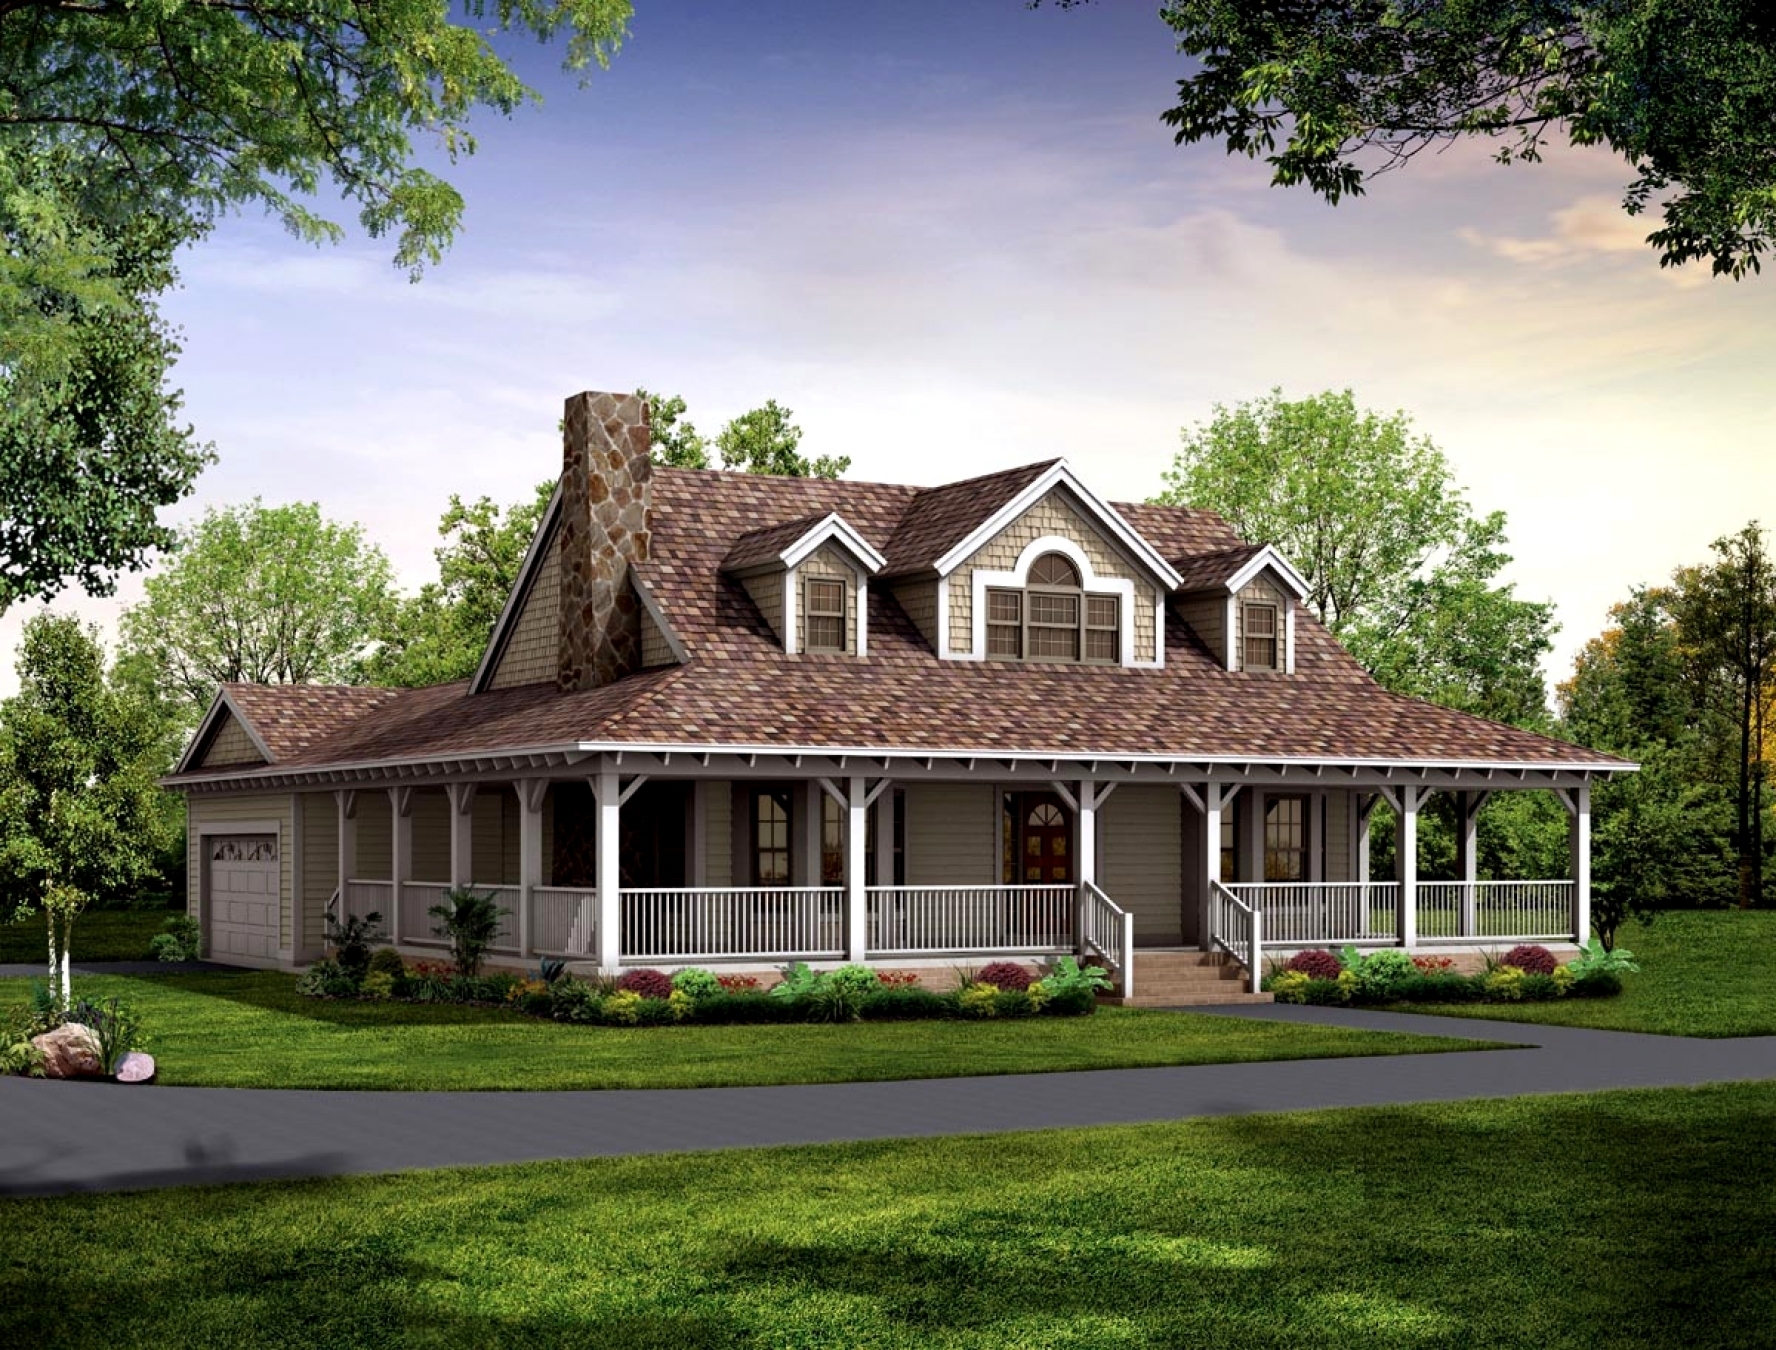 Old Farmhouse With Wrap Around Porch See More On Home Lifestyle